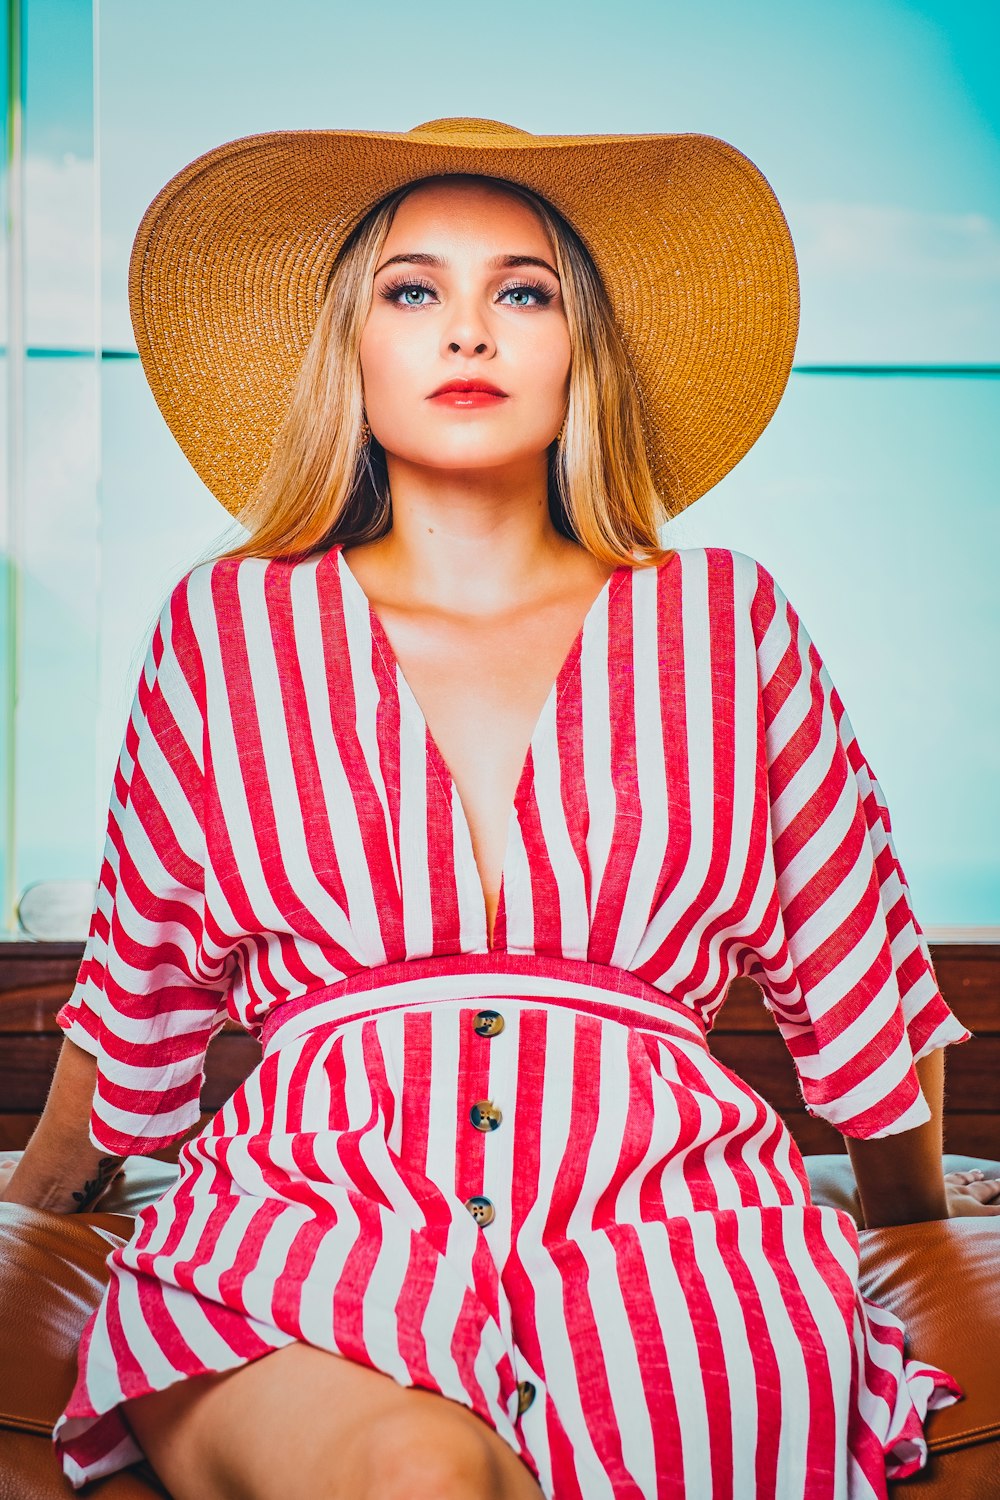 woman in red and white striped long sleeve shirt wearing brown hat